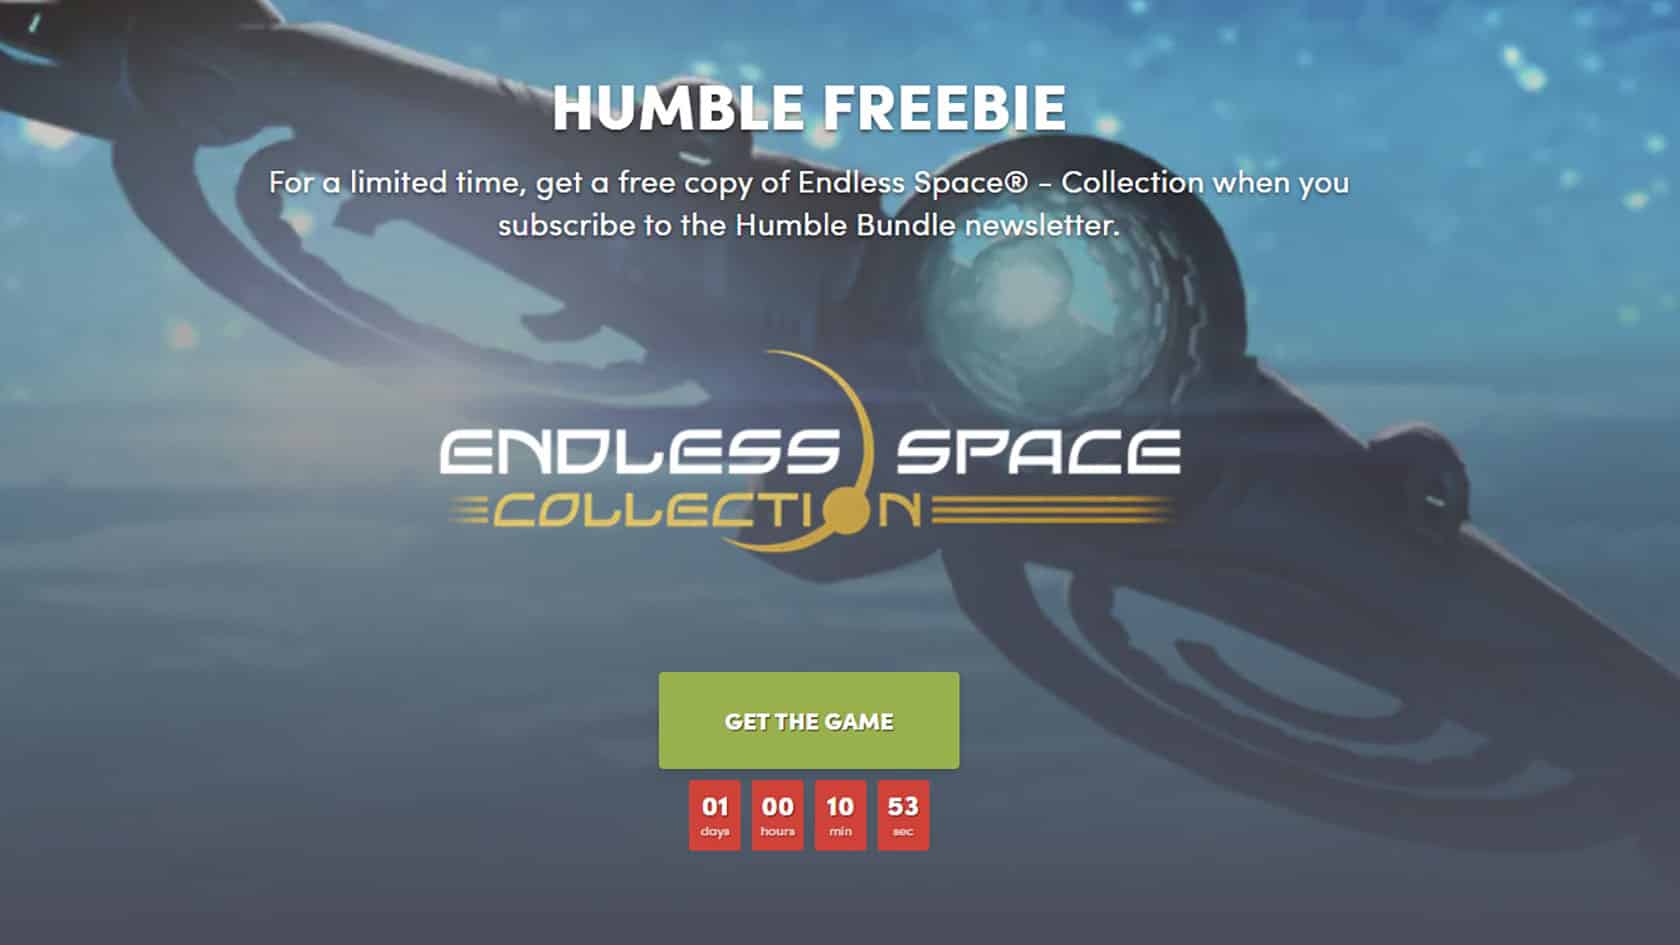 humbe freebie endless space collection babt